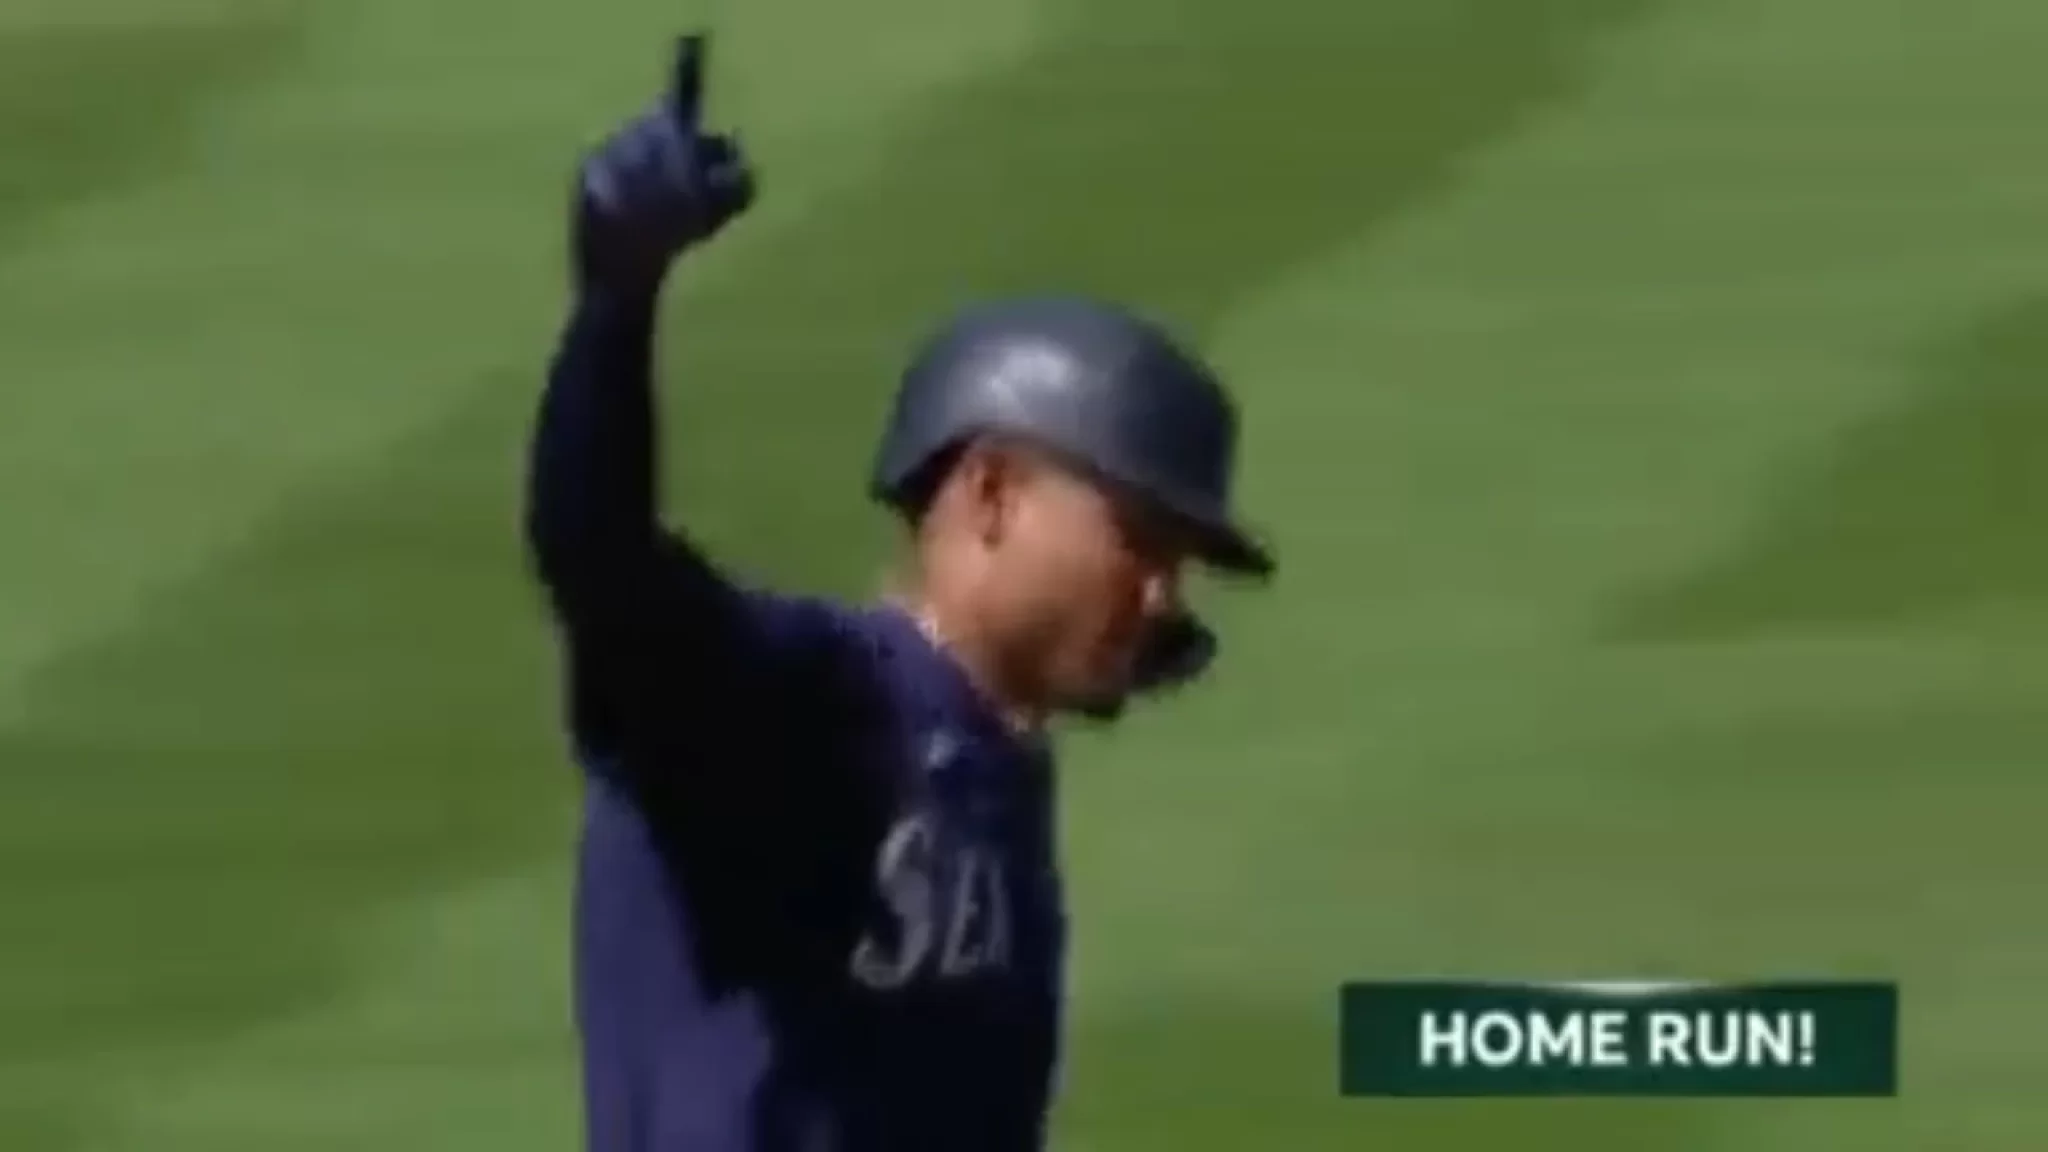 Julio Rodríguez and Ty France hit back-to-back home runs to give Mariners a lead over the Tigers